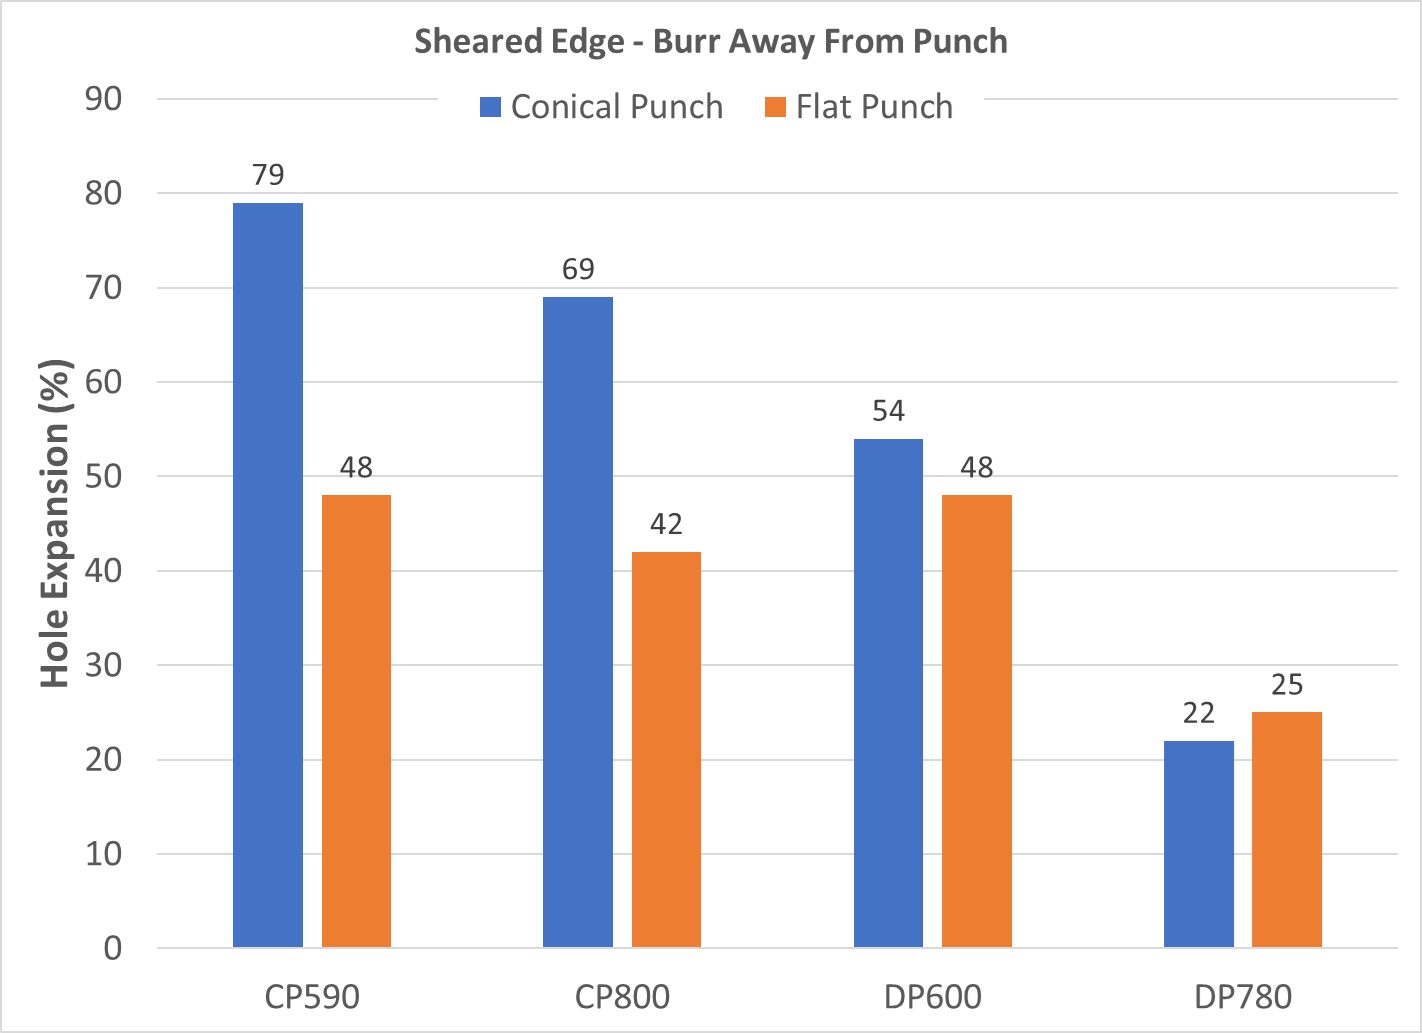 Figure 15: Effect of Punch Type on Hole Expansion of Sheared Holes with Burr Facing Away From The Punch [Based on Data from Reference 11]